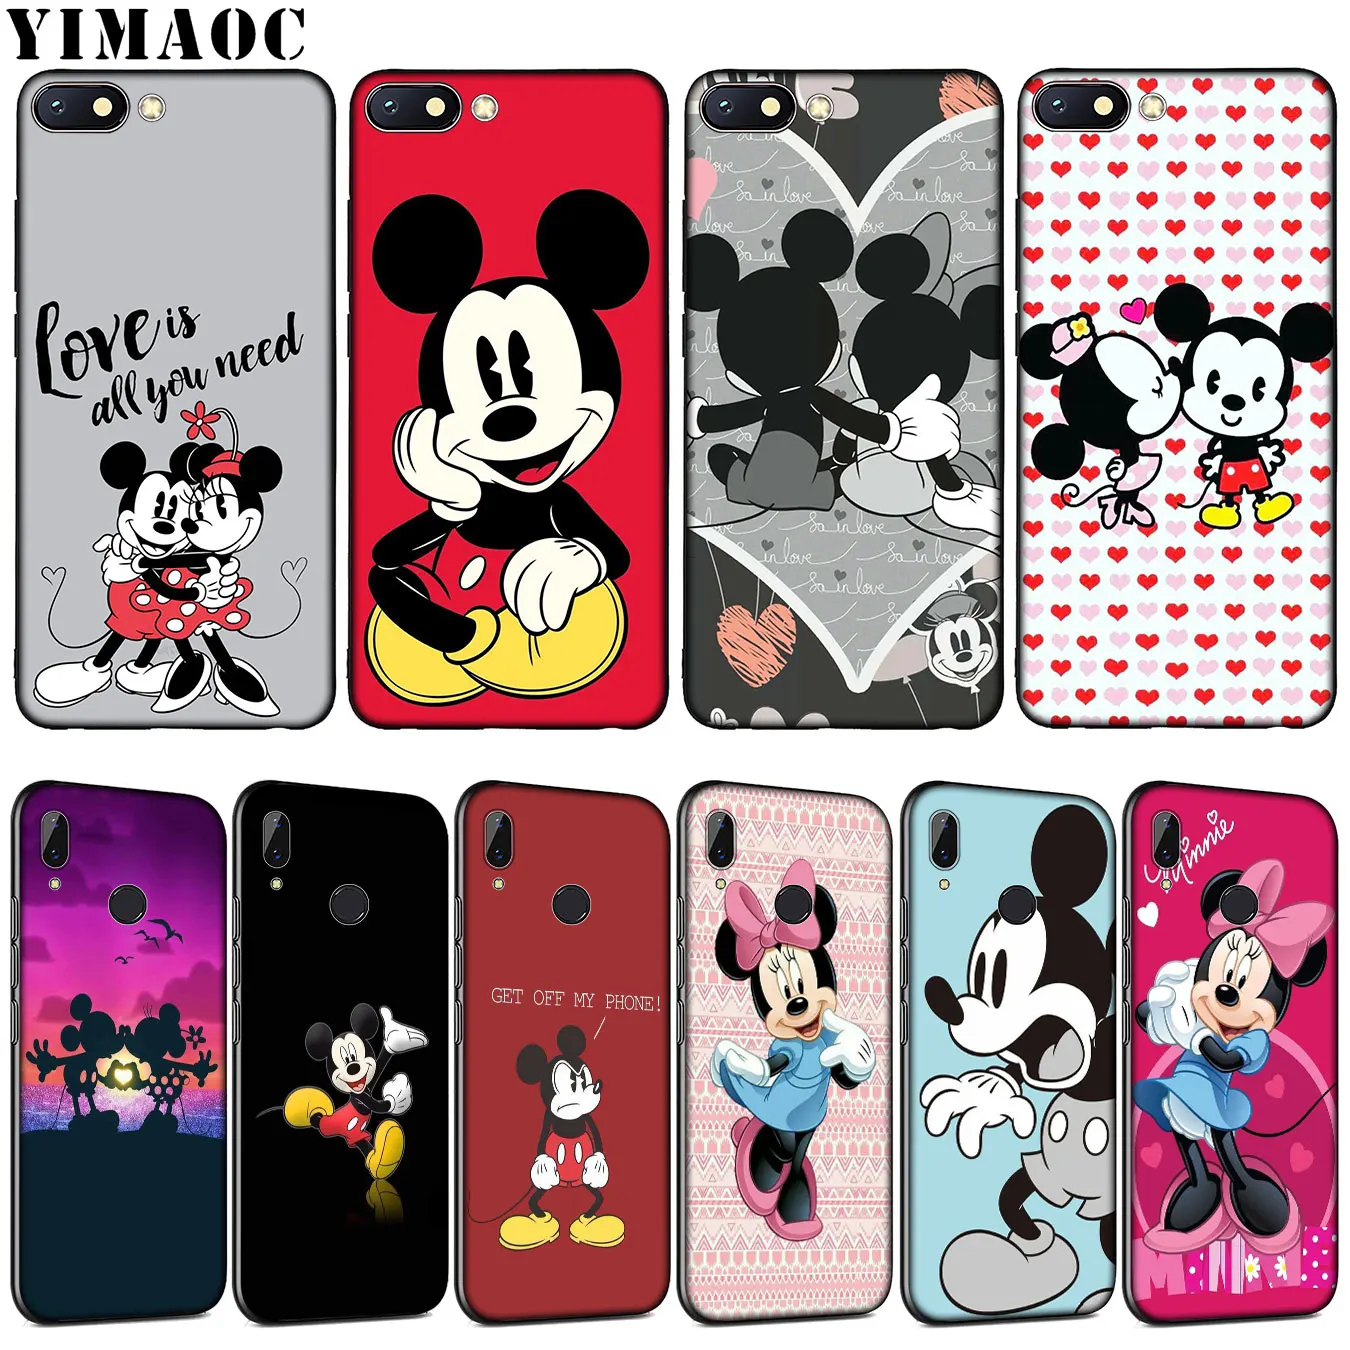 

YIMAOC Cartoon mickey minnie mouse Soft Silicone Phone Case for Xiaomi Redmi K20 GO S2 6A 7A 4A 4X Note 8 7 5 6 Pro Plus Cover